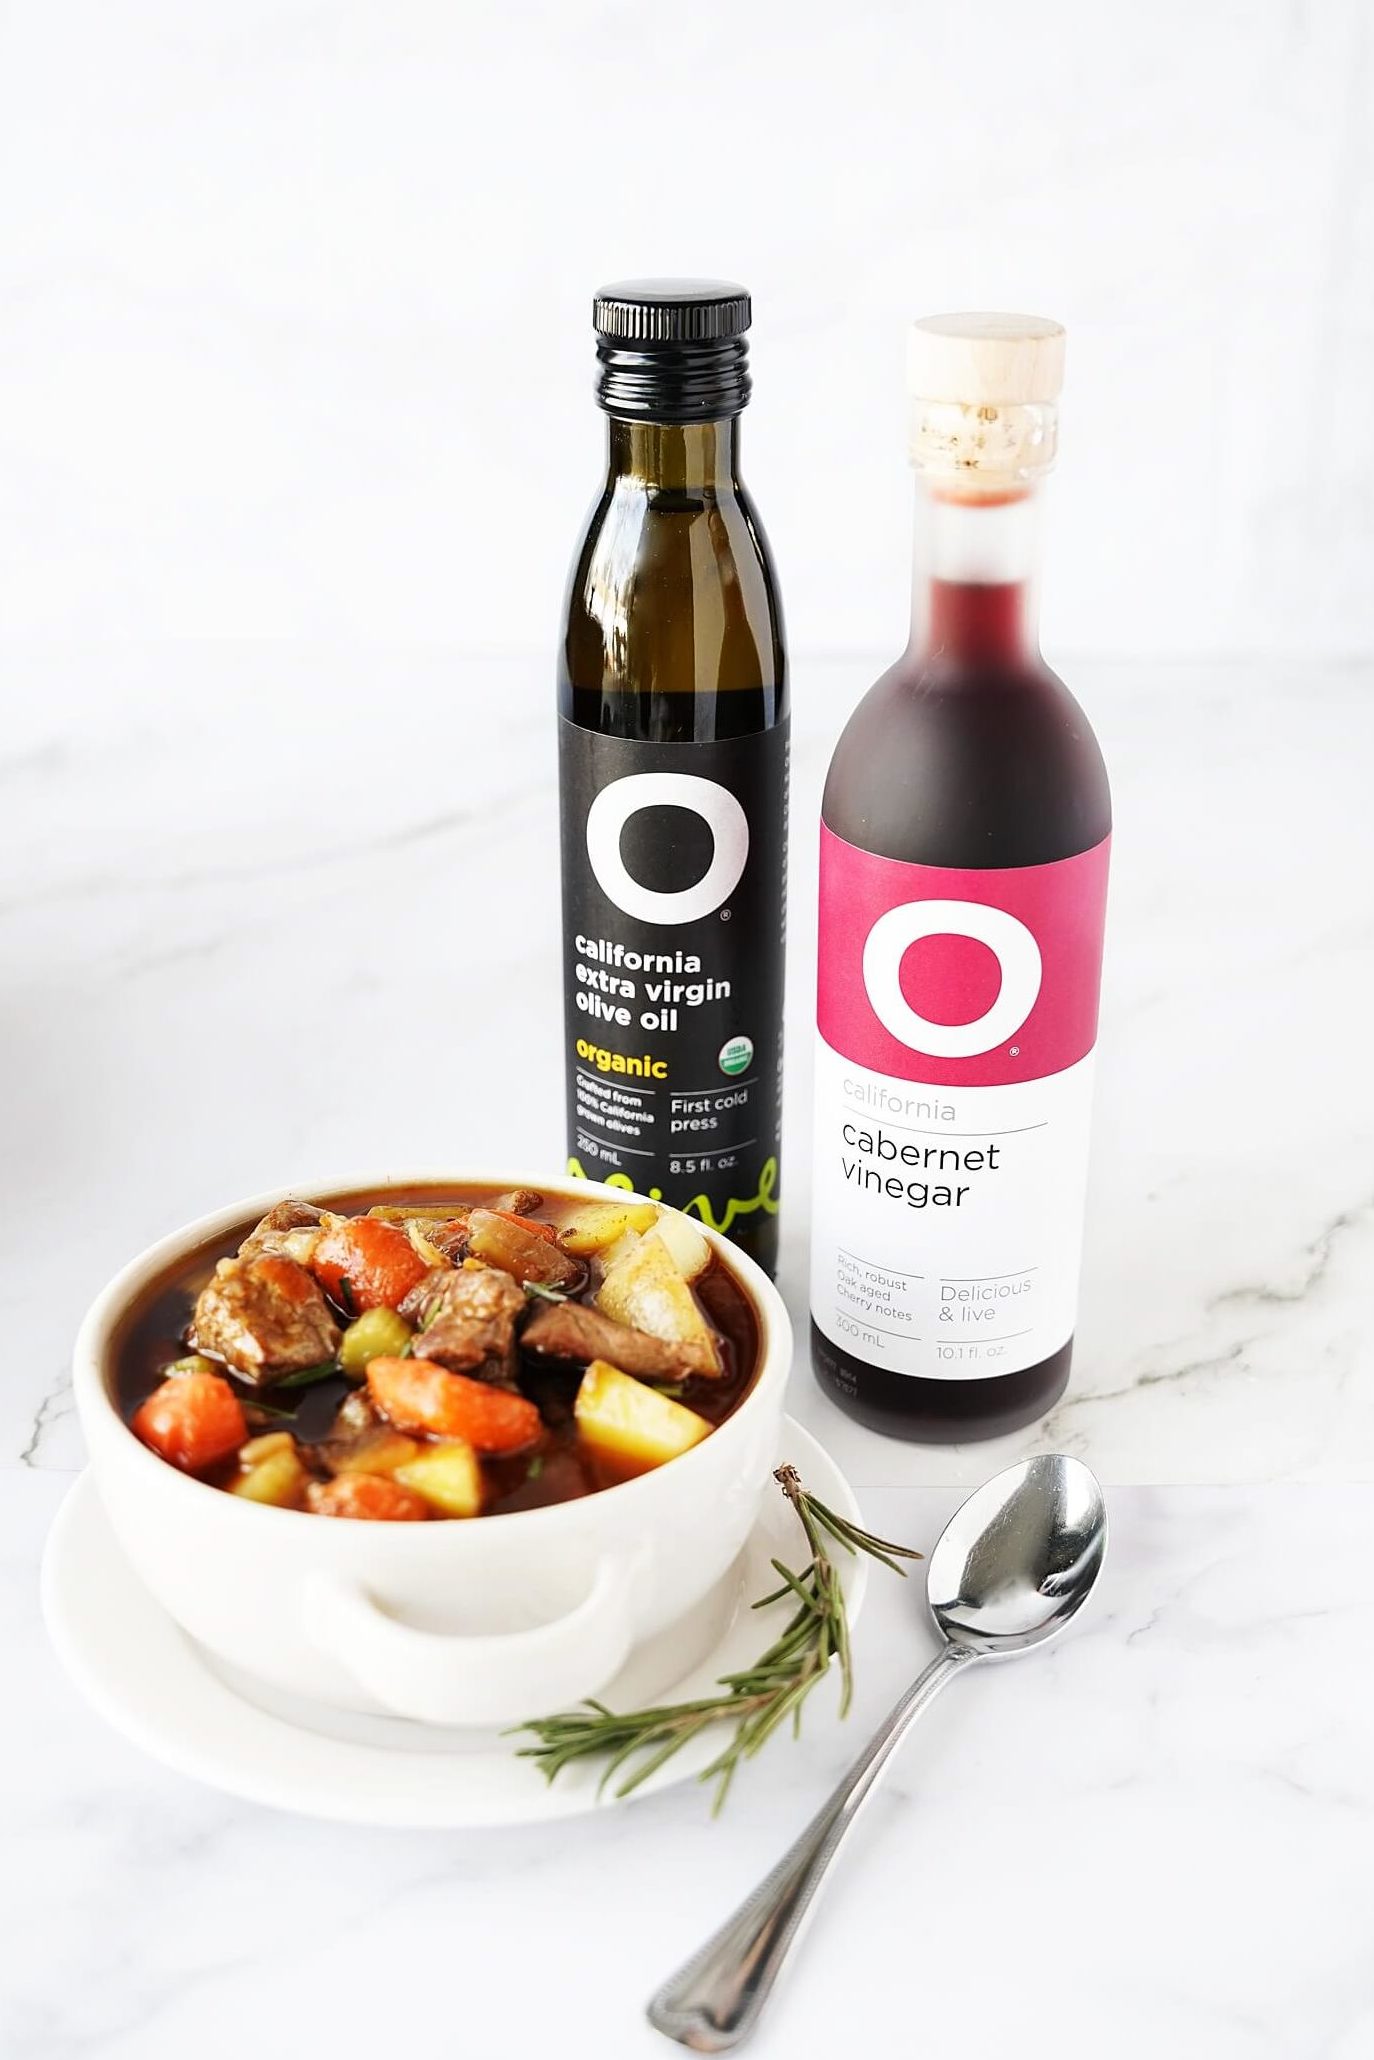 vertical image of beef stew in bowl with O Olive Oil & Vinegar bottles